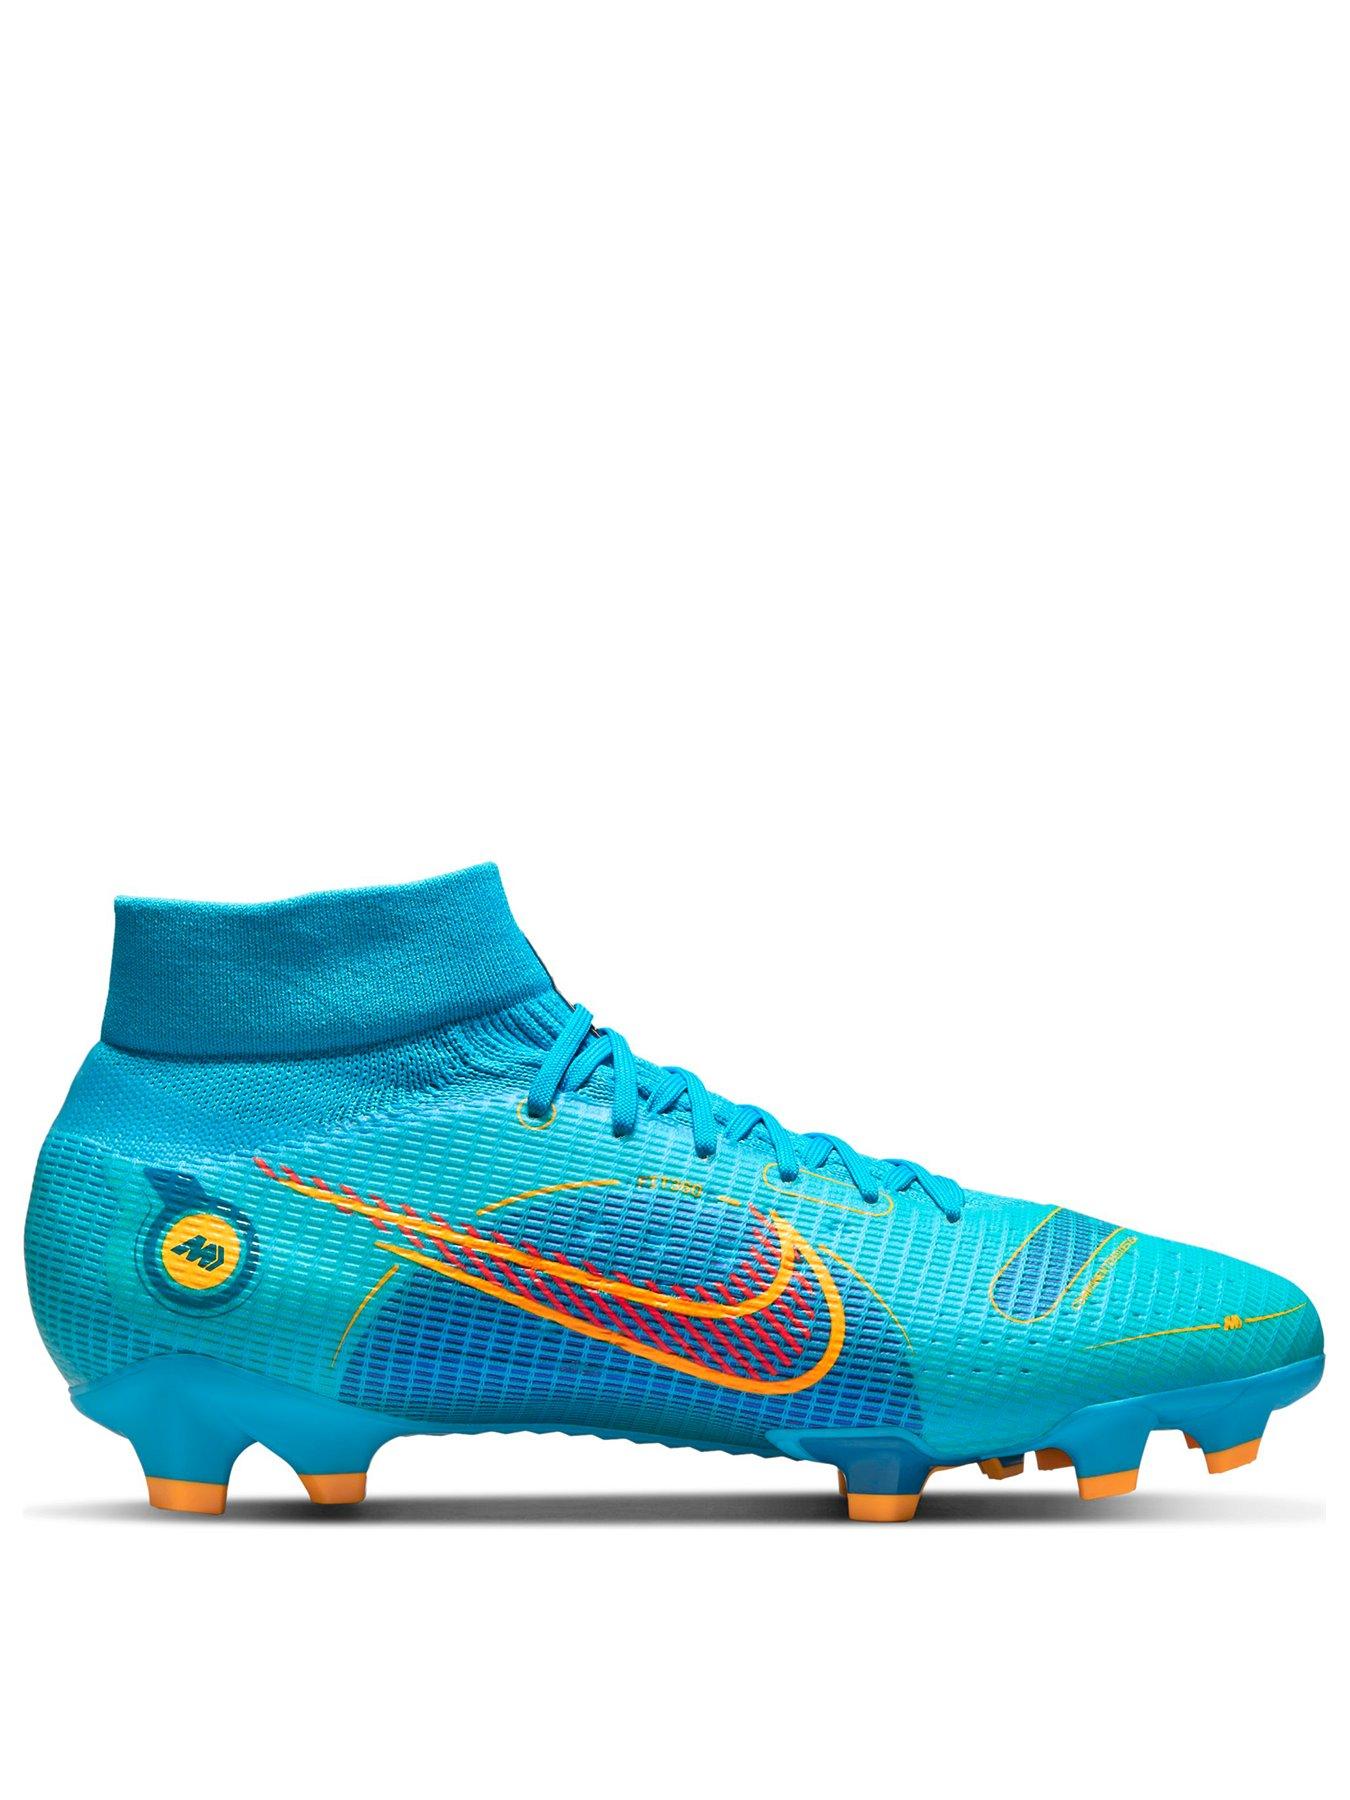 Men Mercurial Superfly 8 Pro Firm Ground Football Boots - Blue